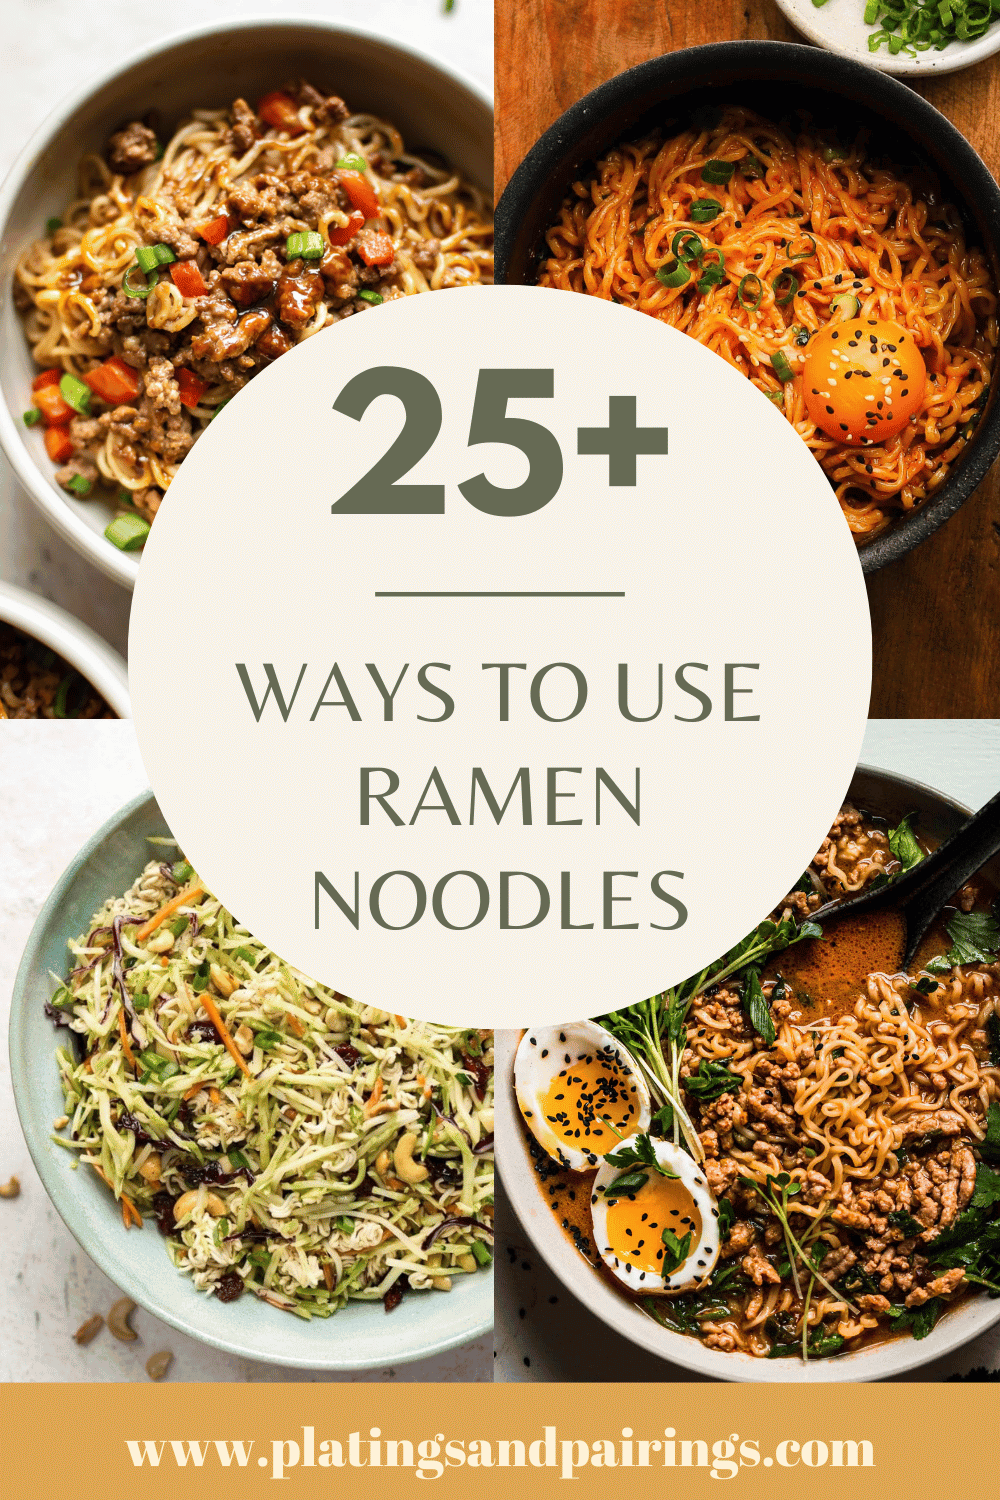 Collage of recipes that use ramen noodles with text overlay.